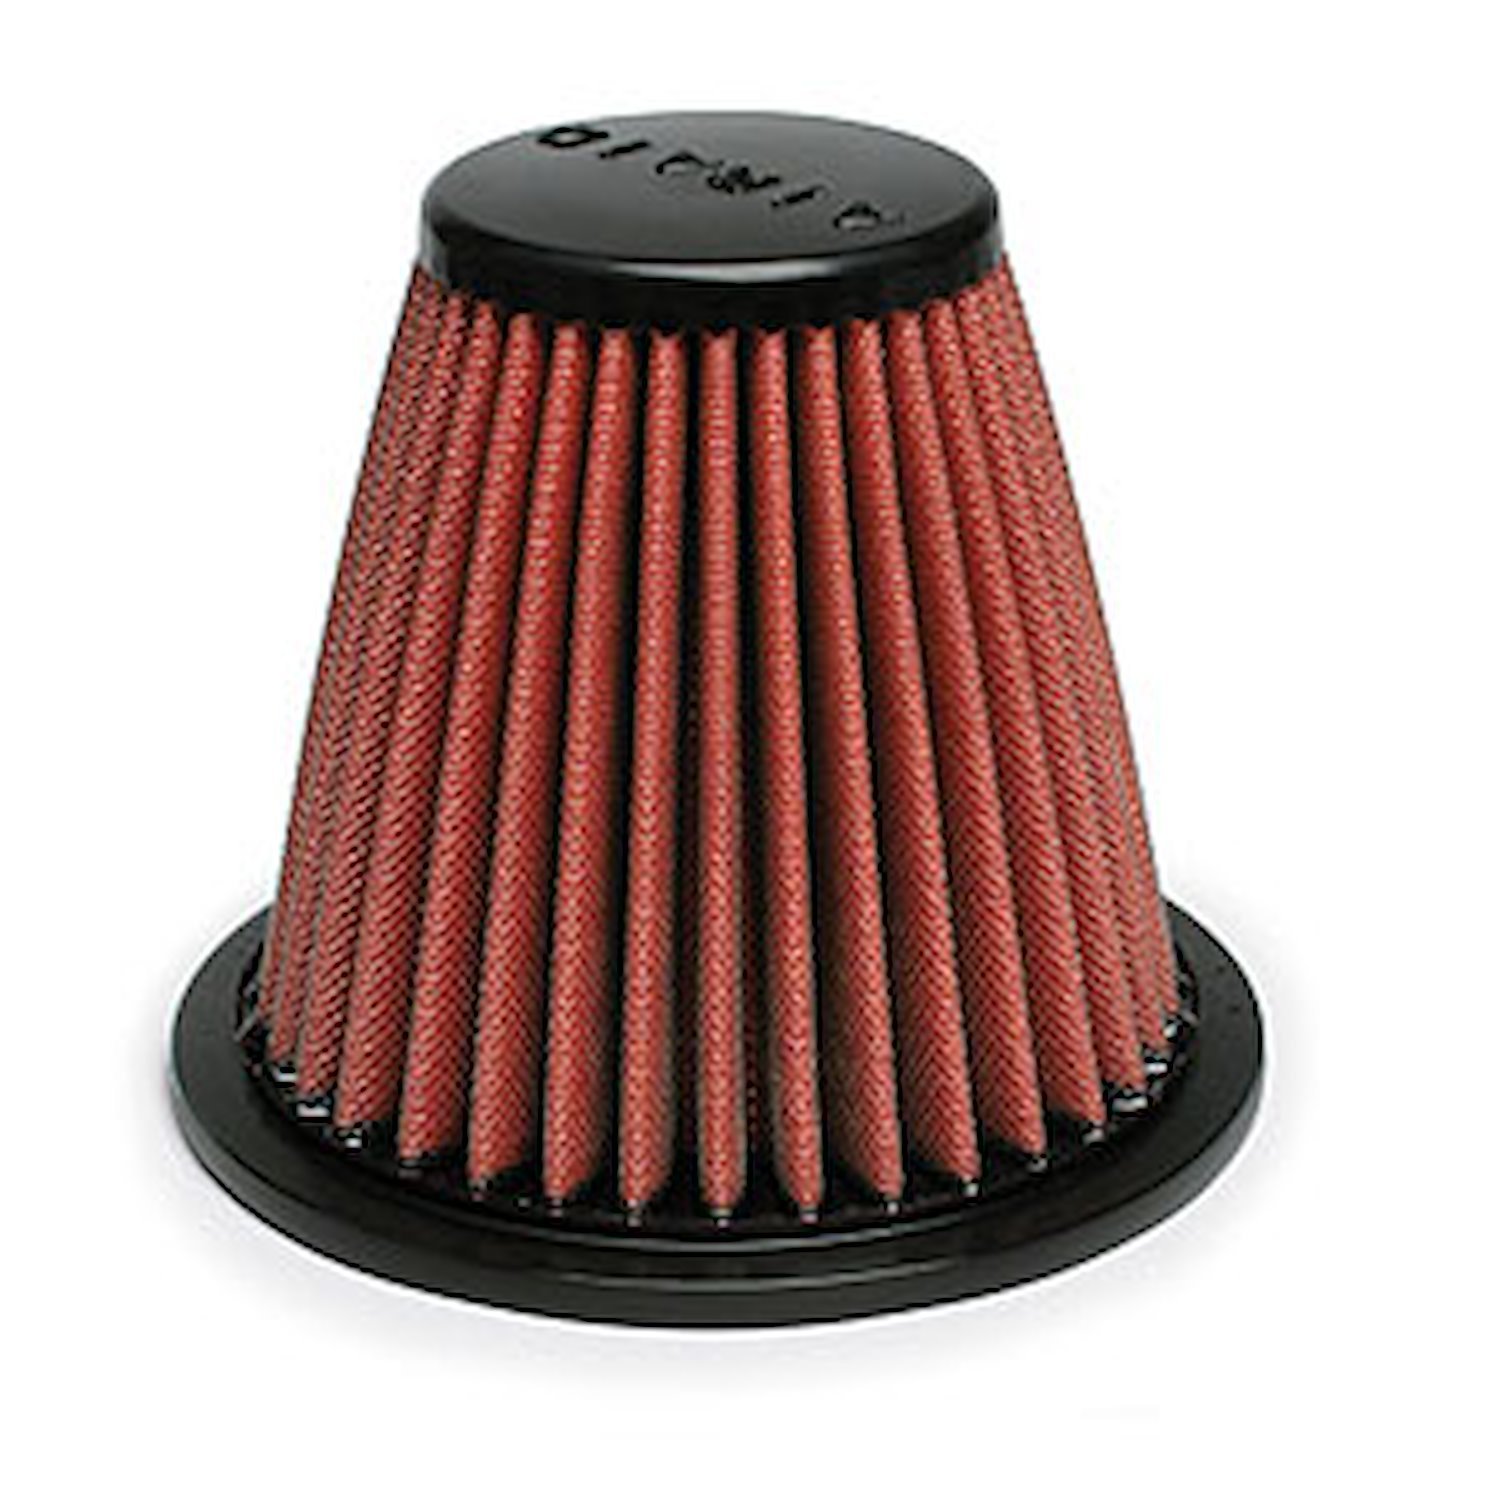 SynthaMax "Dry" OE Replacement Filter 1997-2007 Ford F150 4.6L V8